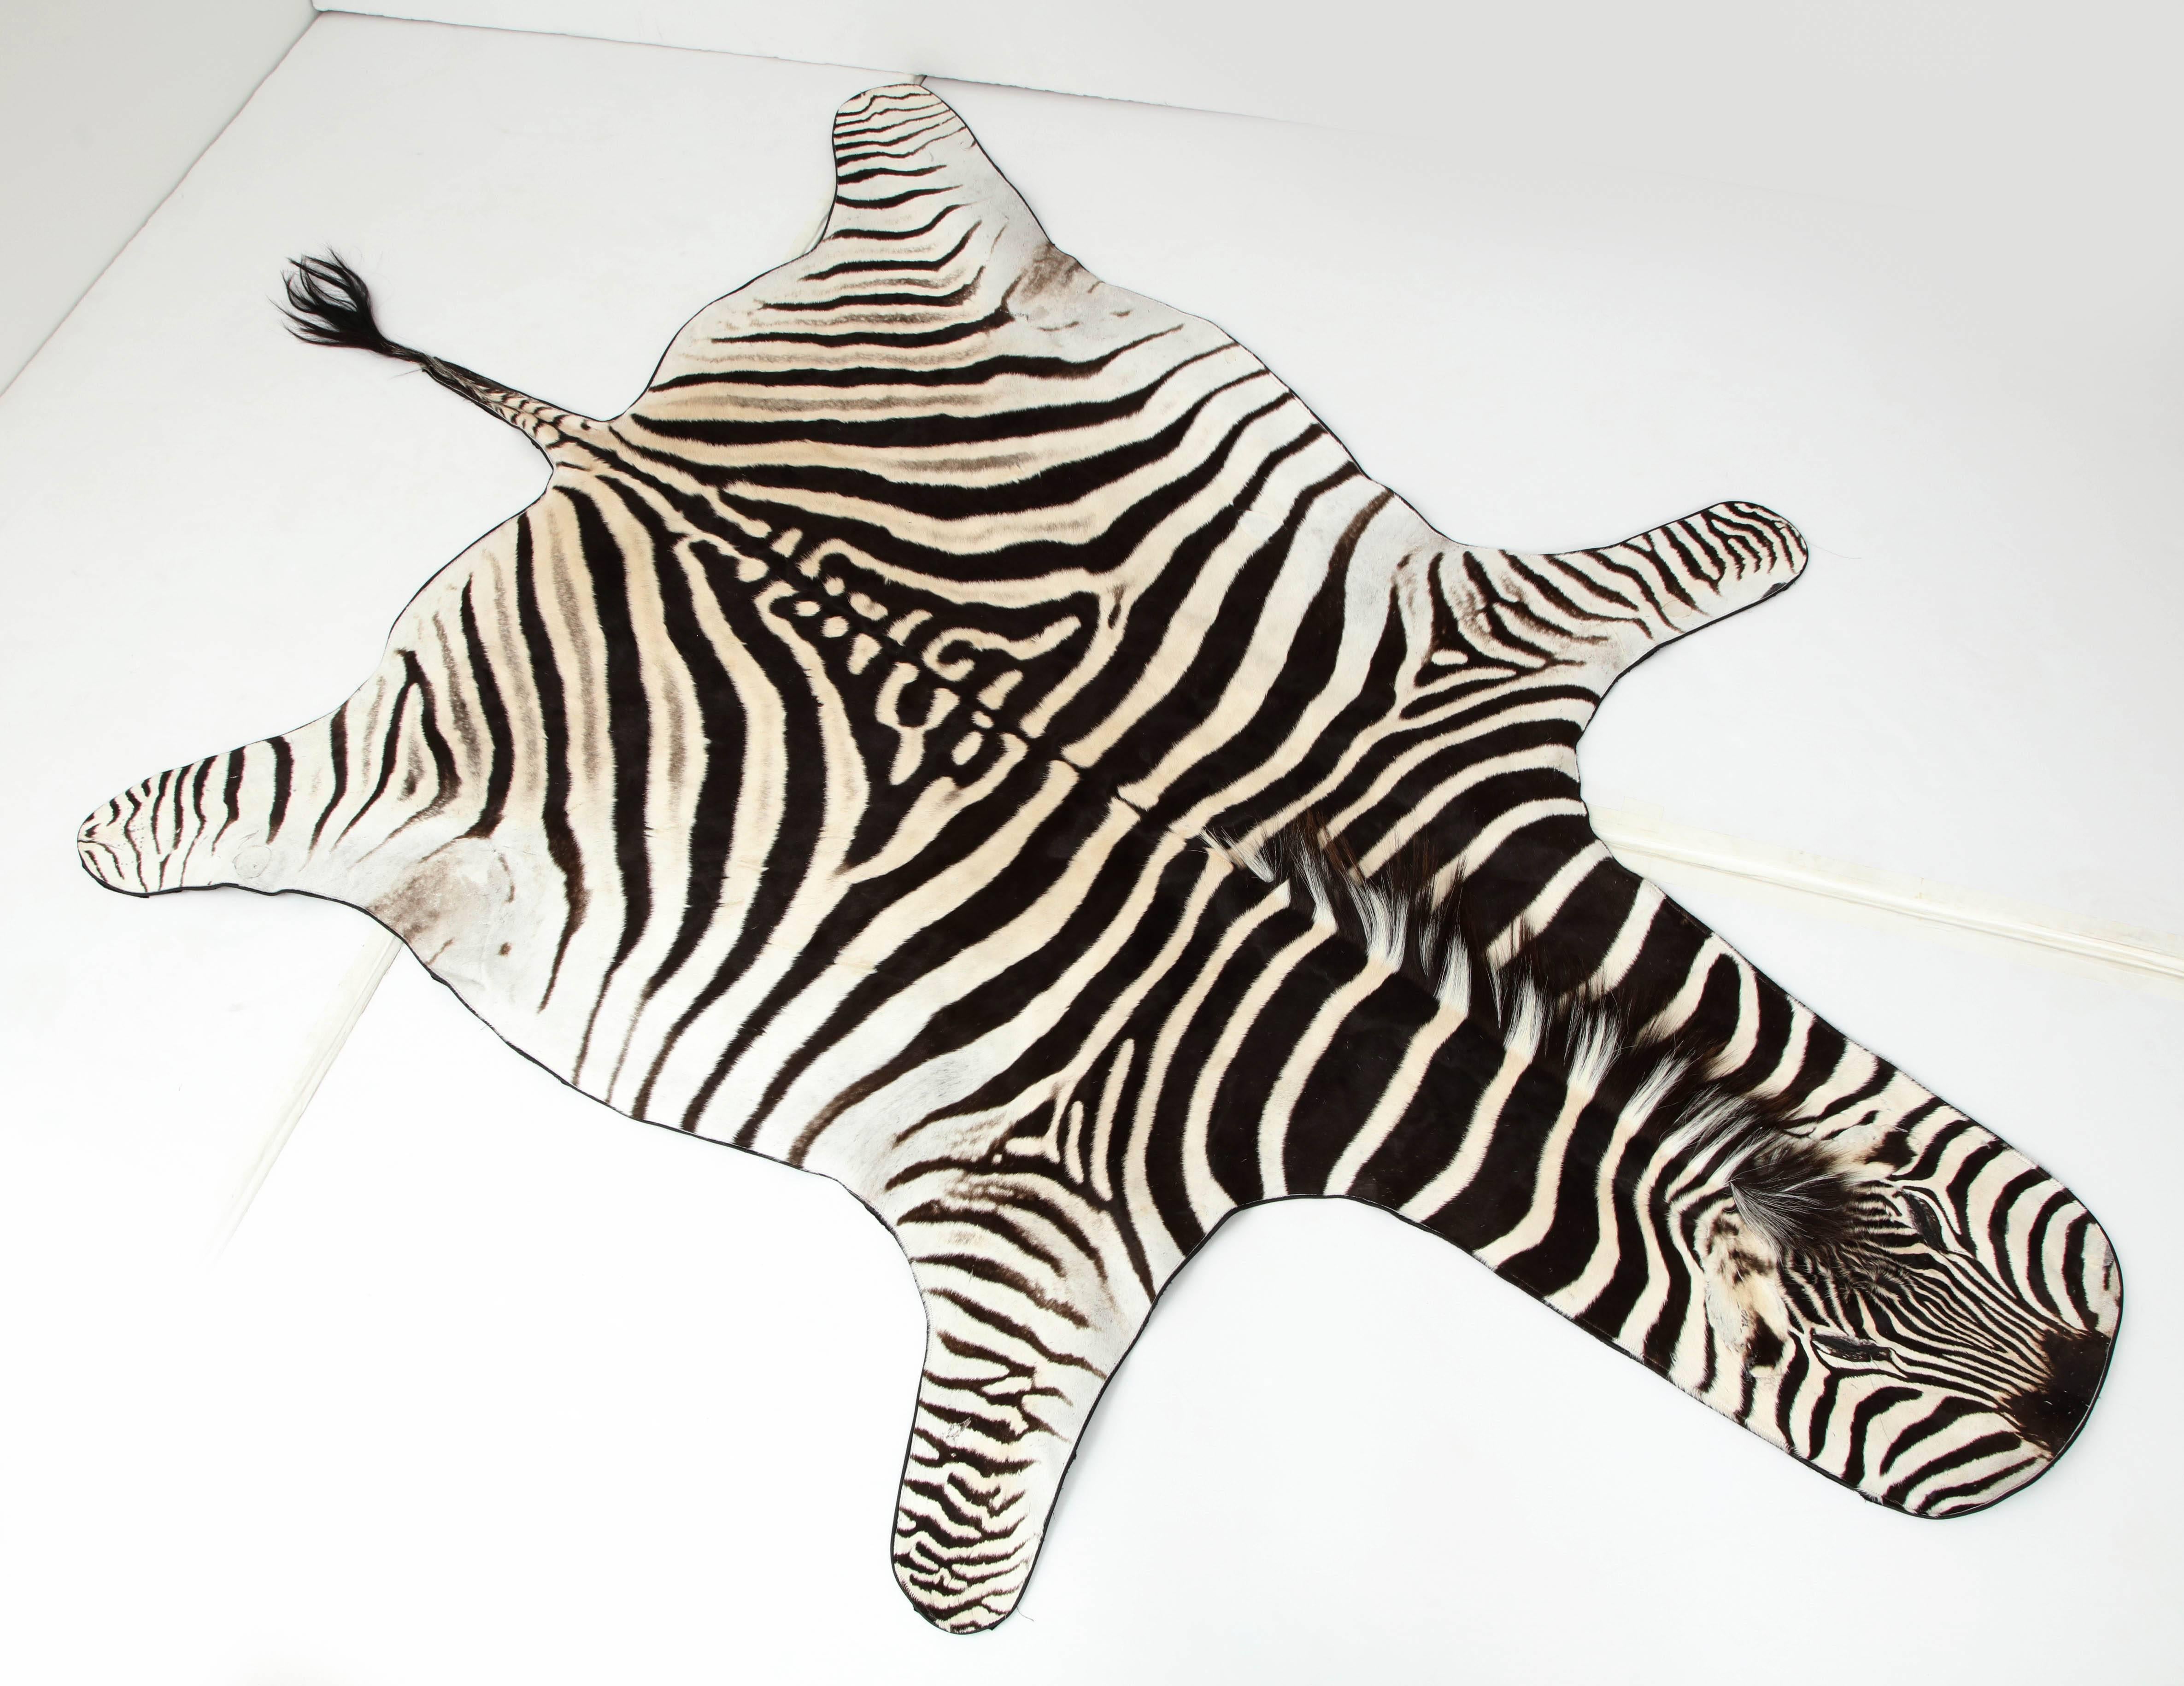 A beautiful zebra hide rug backed with wool fabric and trimmed with leather.
This zebra hide is unusually light in color which is very hard to find.